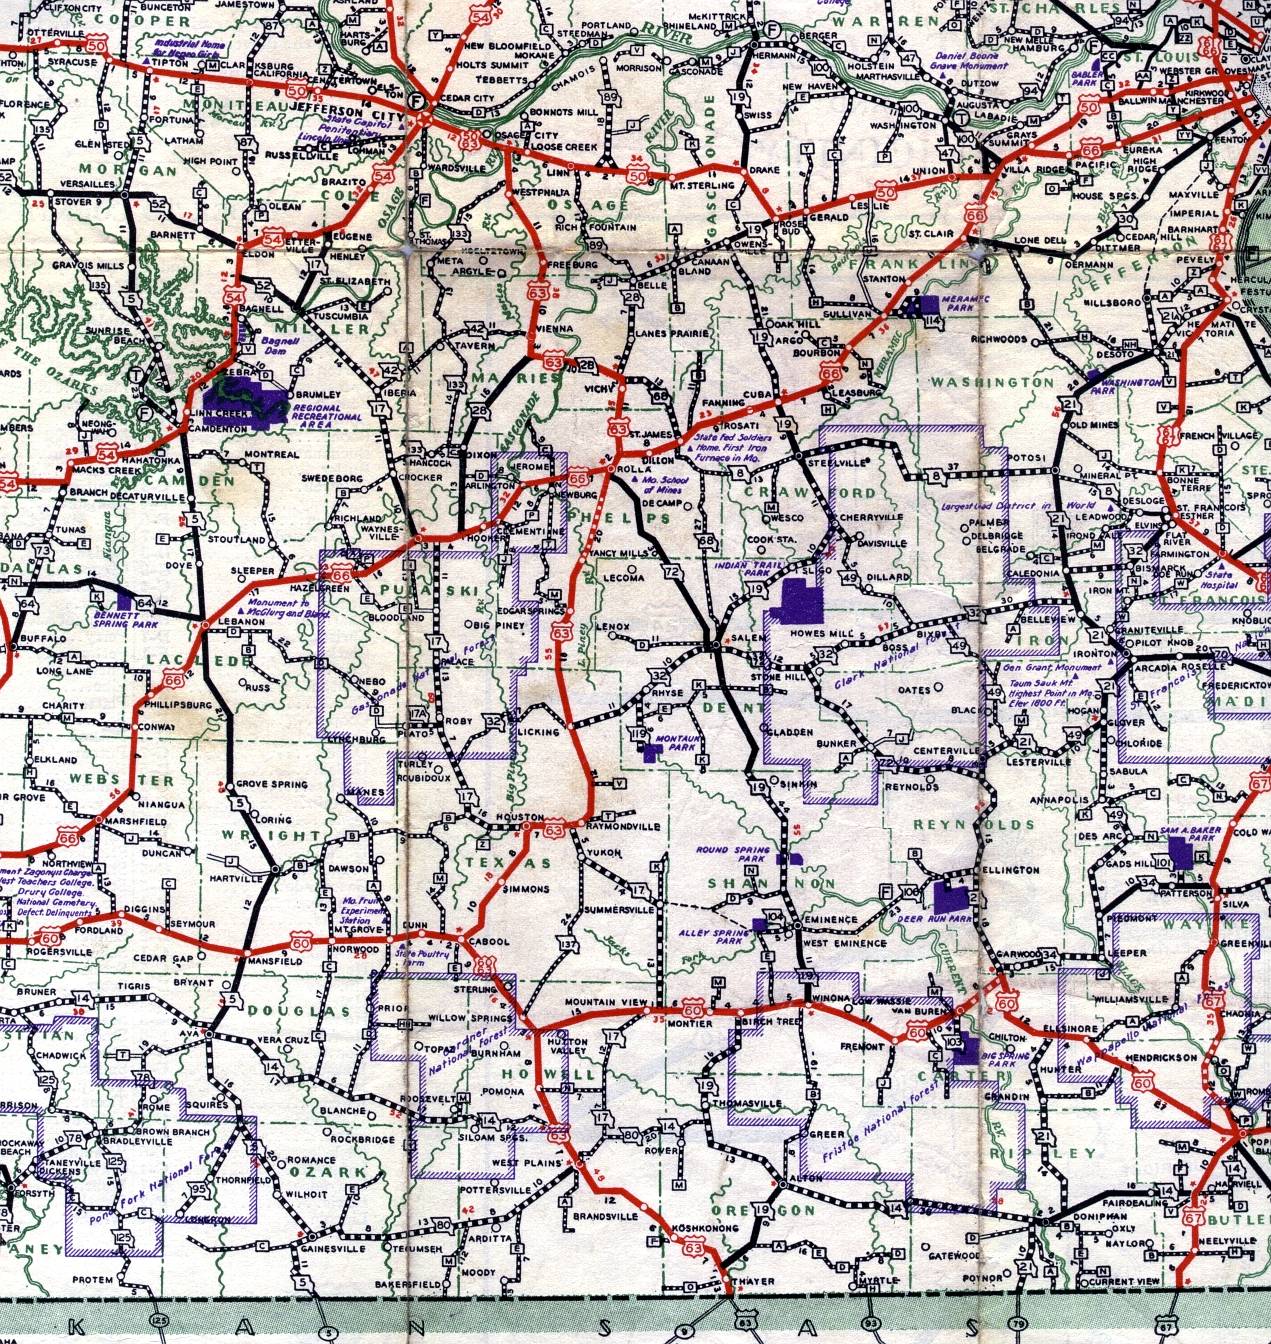 Section of 1937 official highway map for Missouri